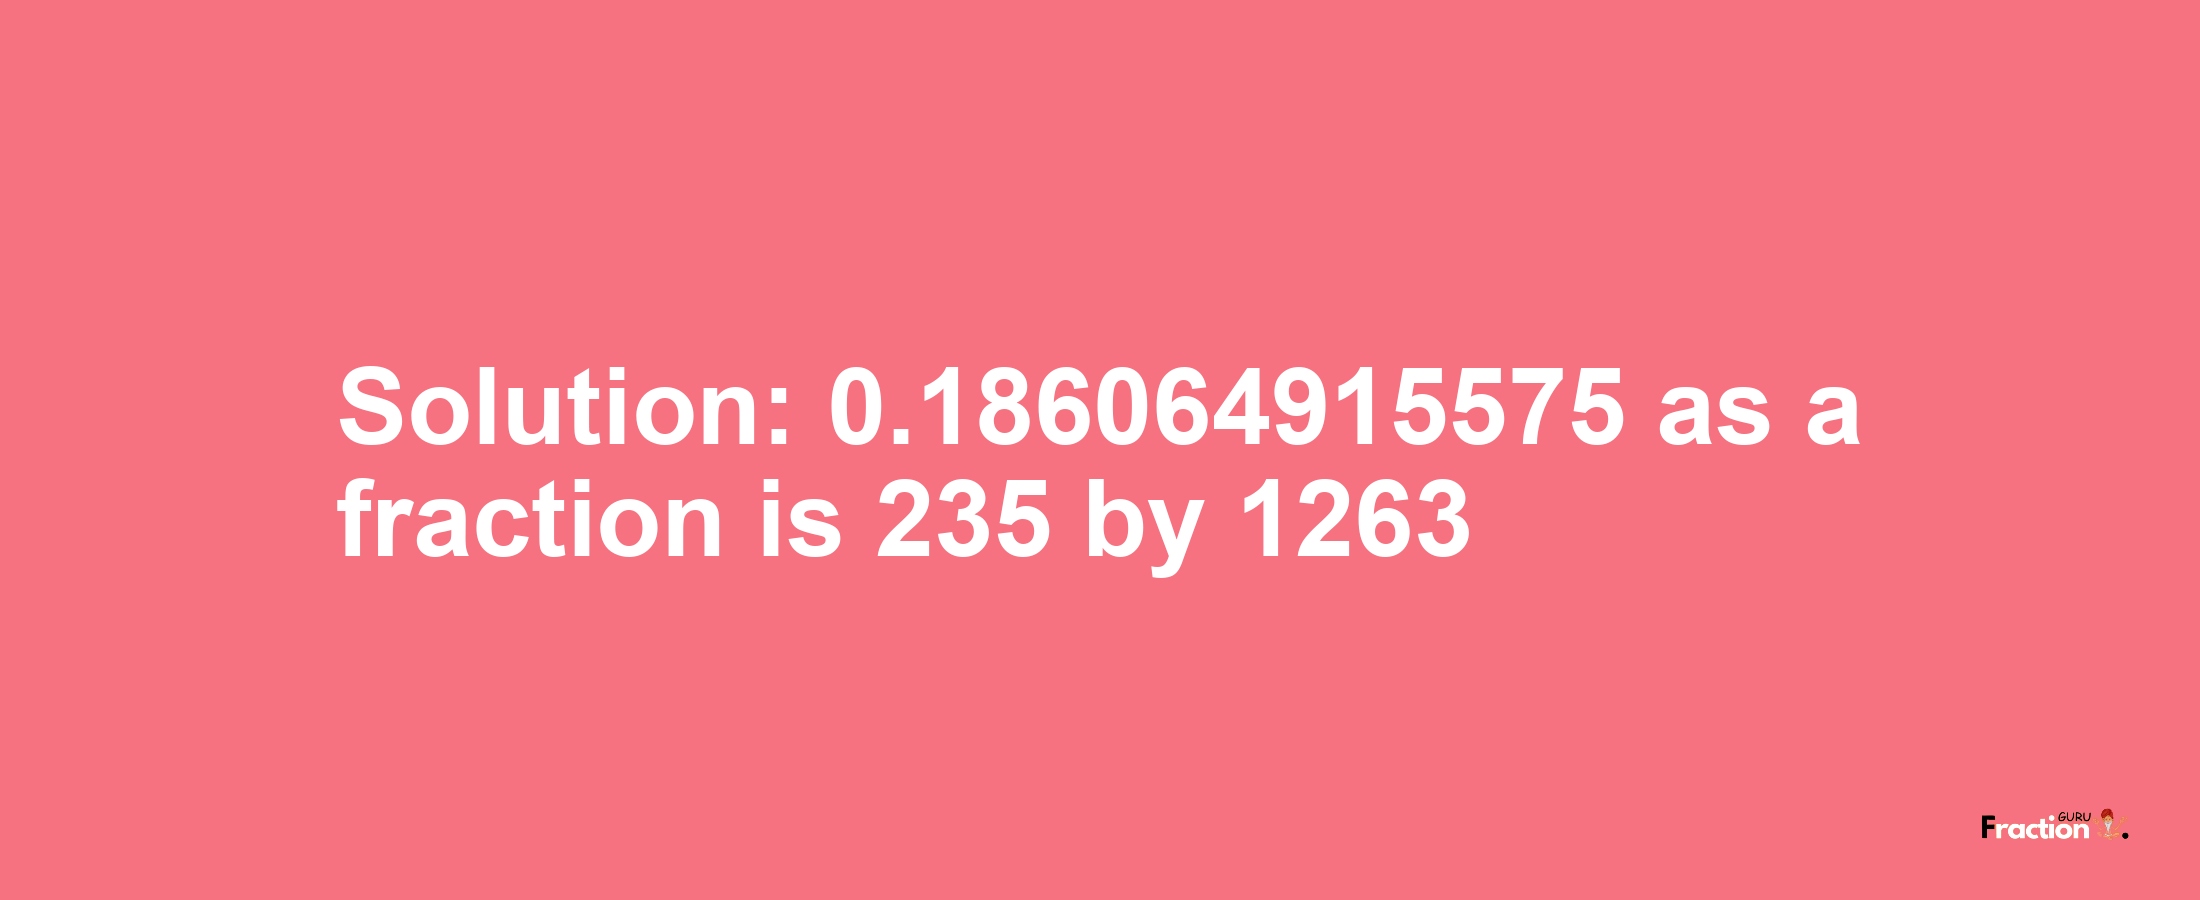 Solution:0.186064915575 as a fraction is 235/1263